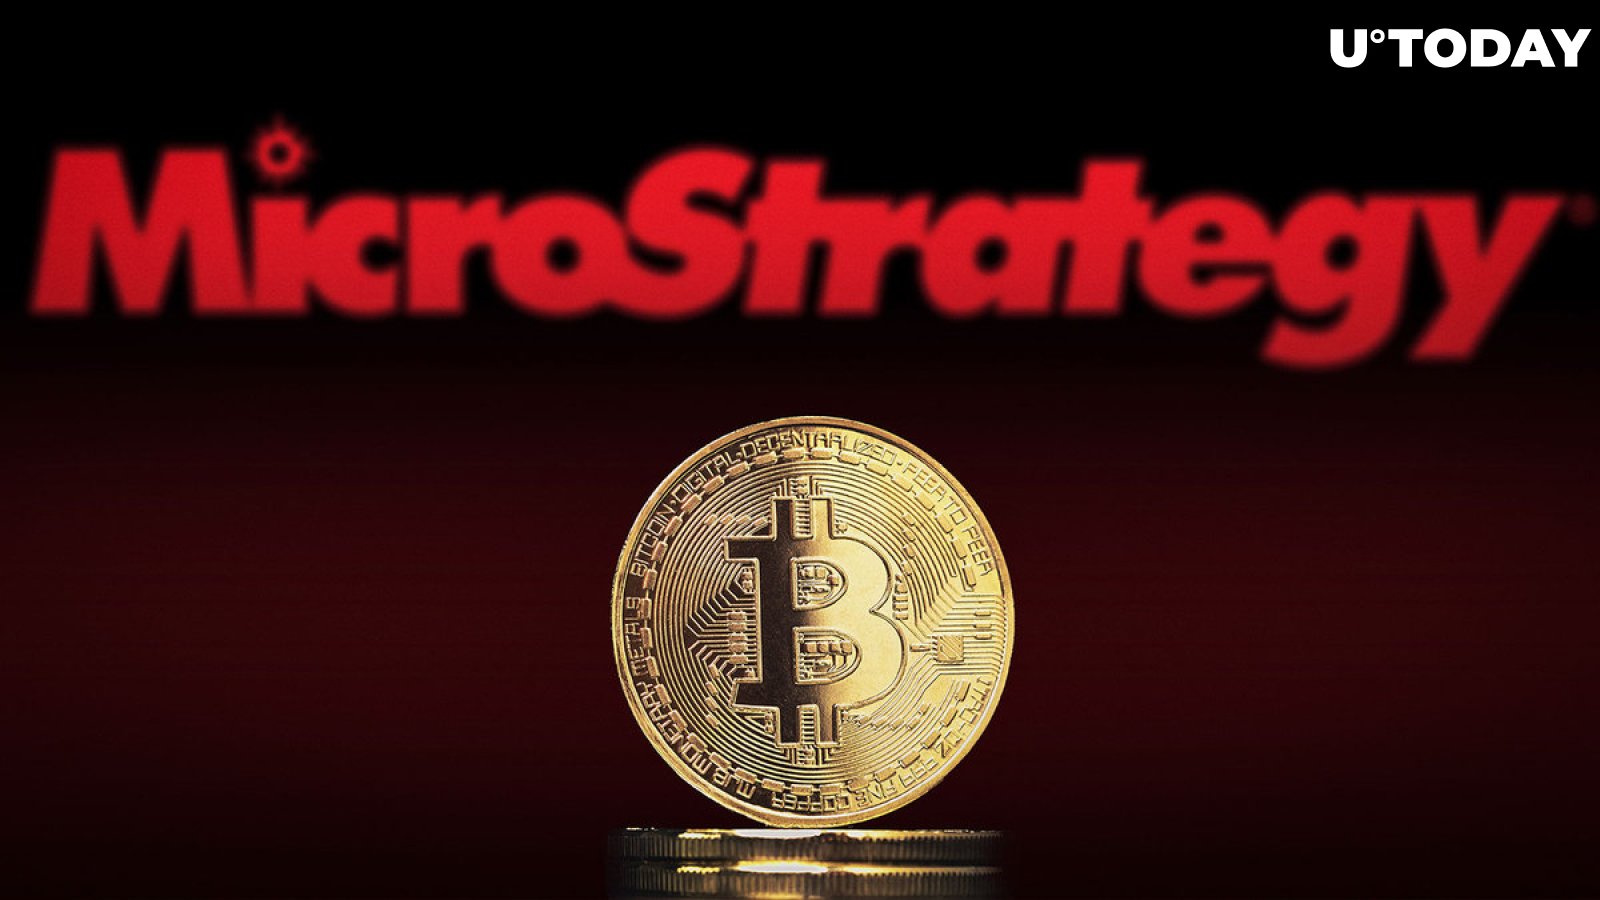 $593 Million Bitcoin (BTC) Purchase Announced by MicroStrategy